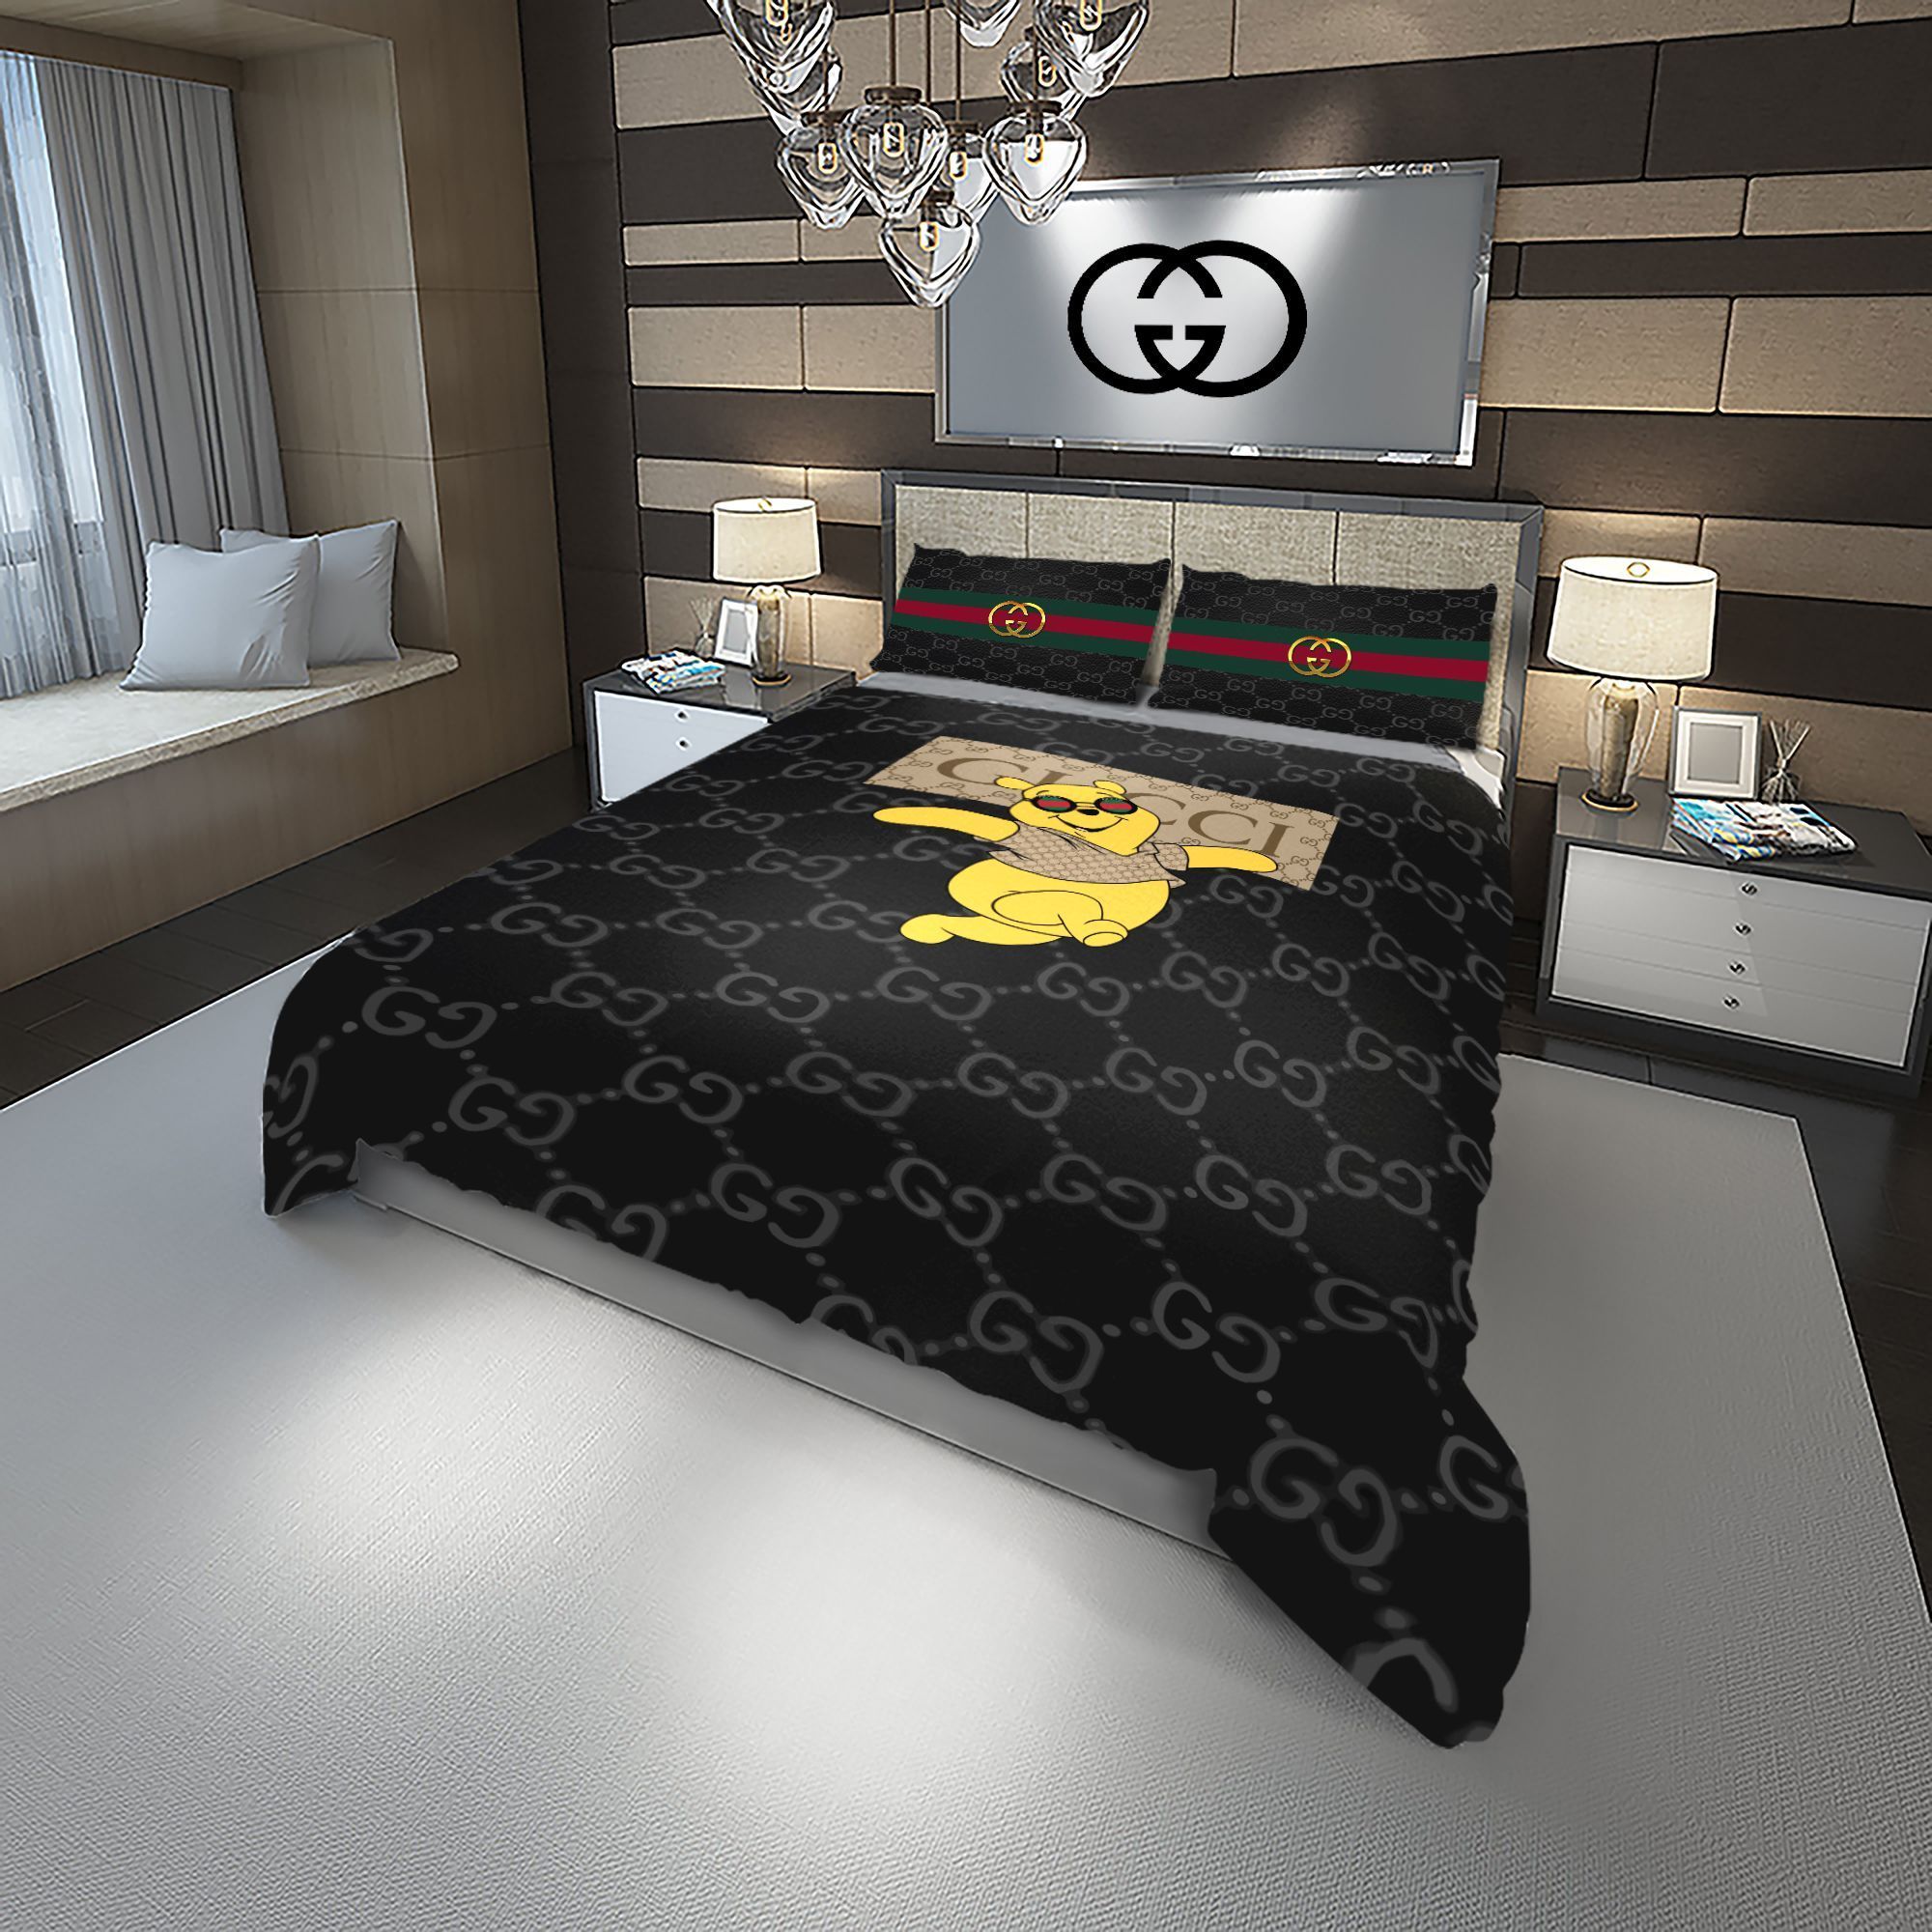 Let me show you about some luxury brand bedding set 2022 174